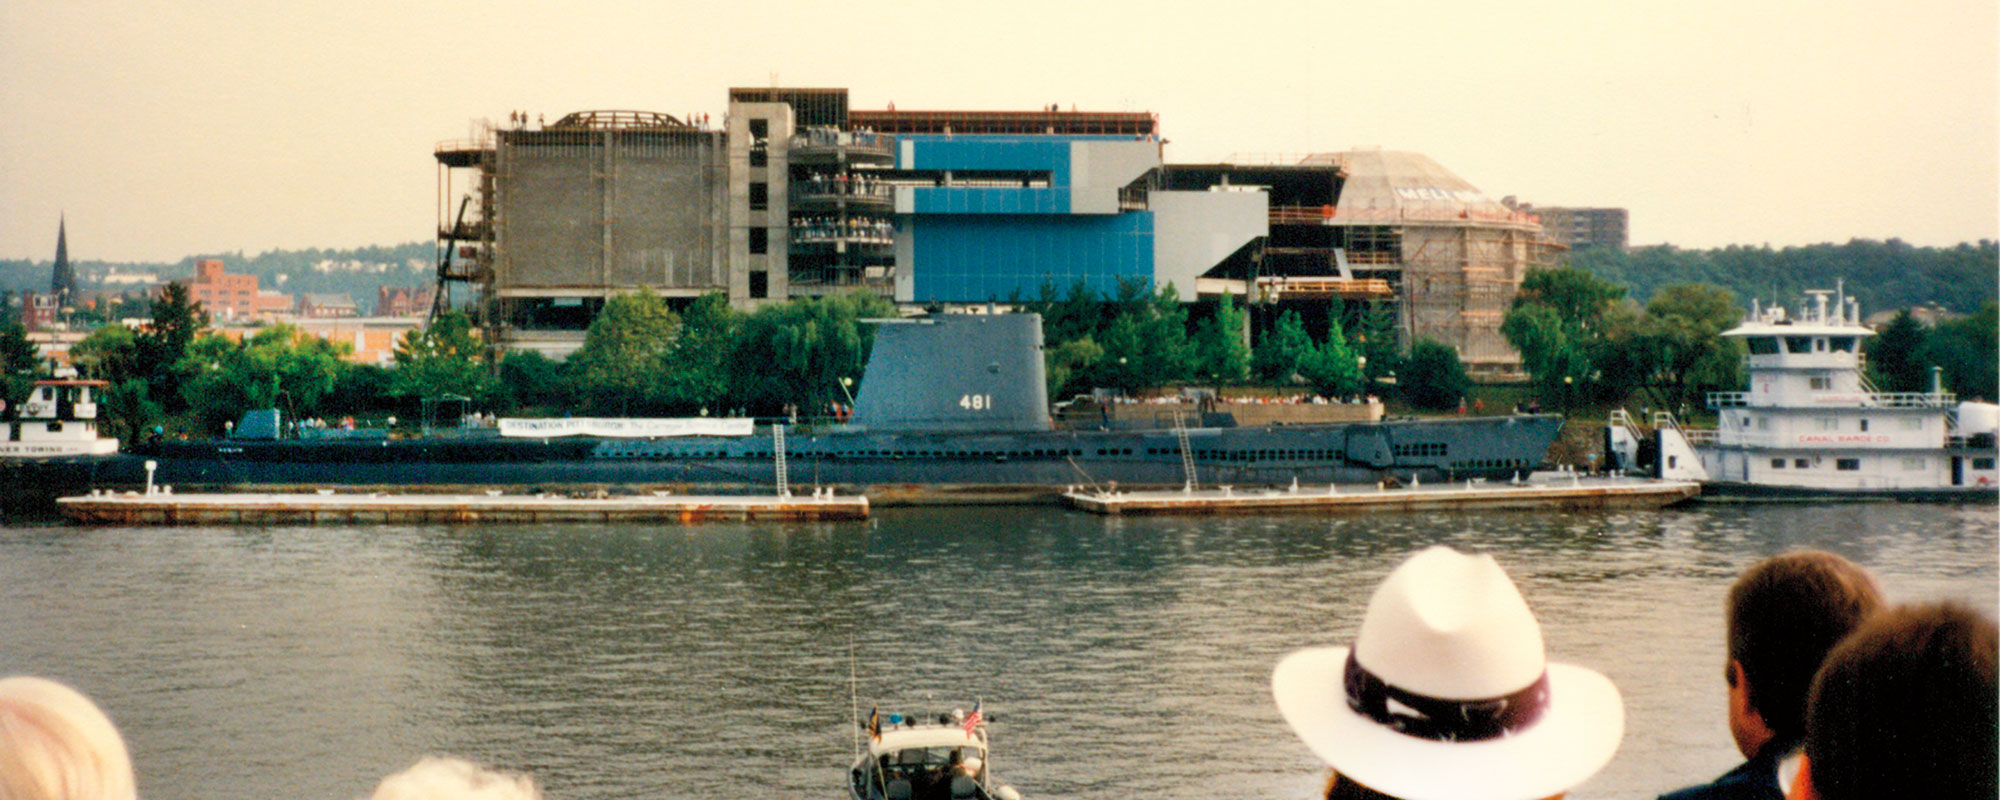 A 1990 photo of the USS Requin submarine in front of the Carnegie Science Center